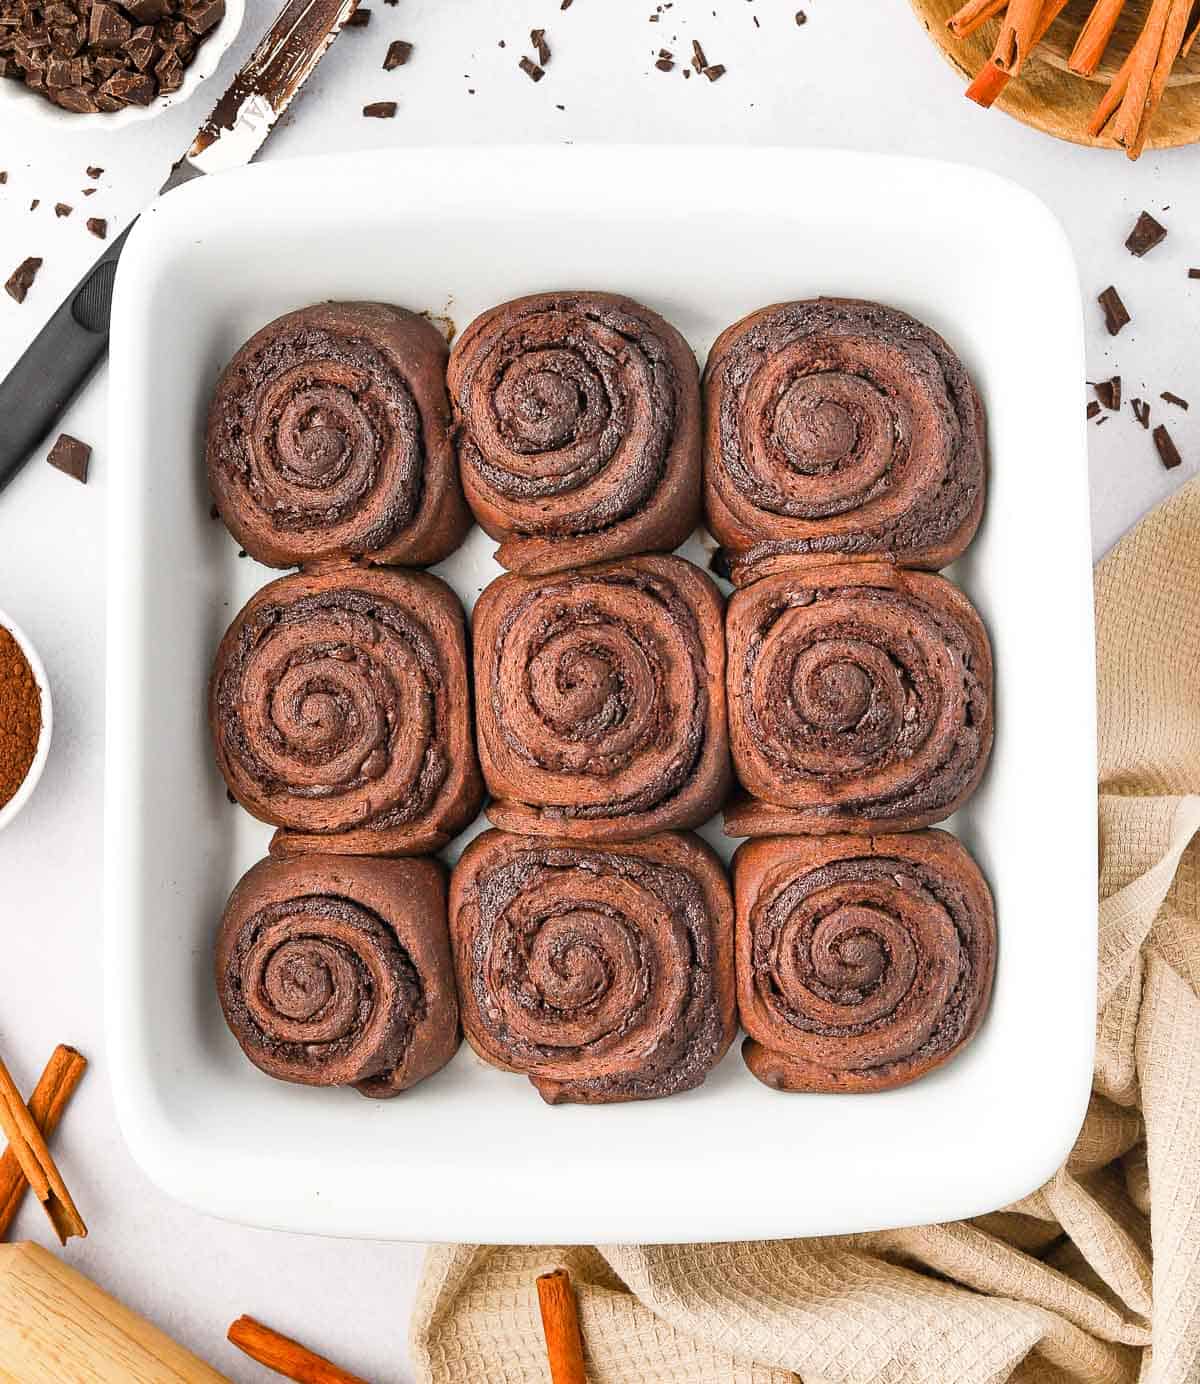 Baked chocolate rolls seen from above.